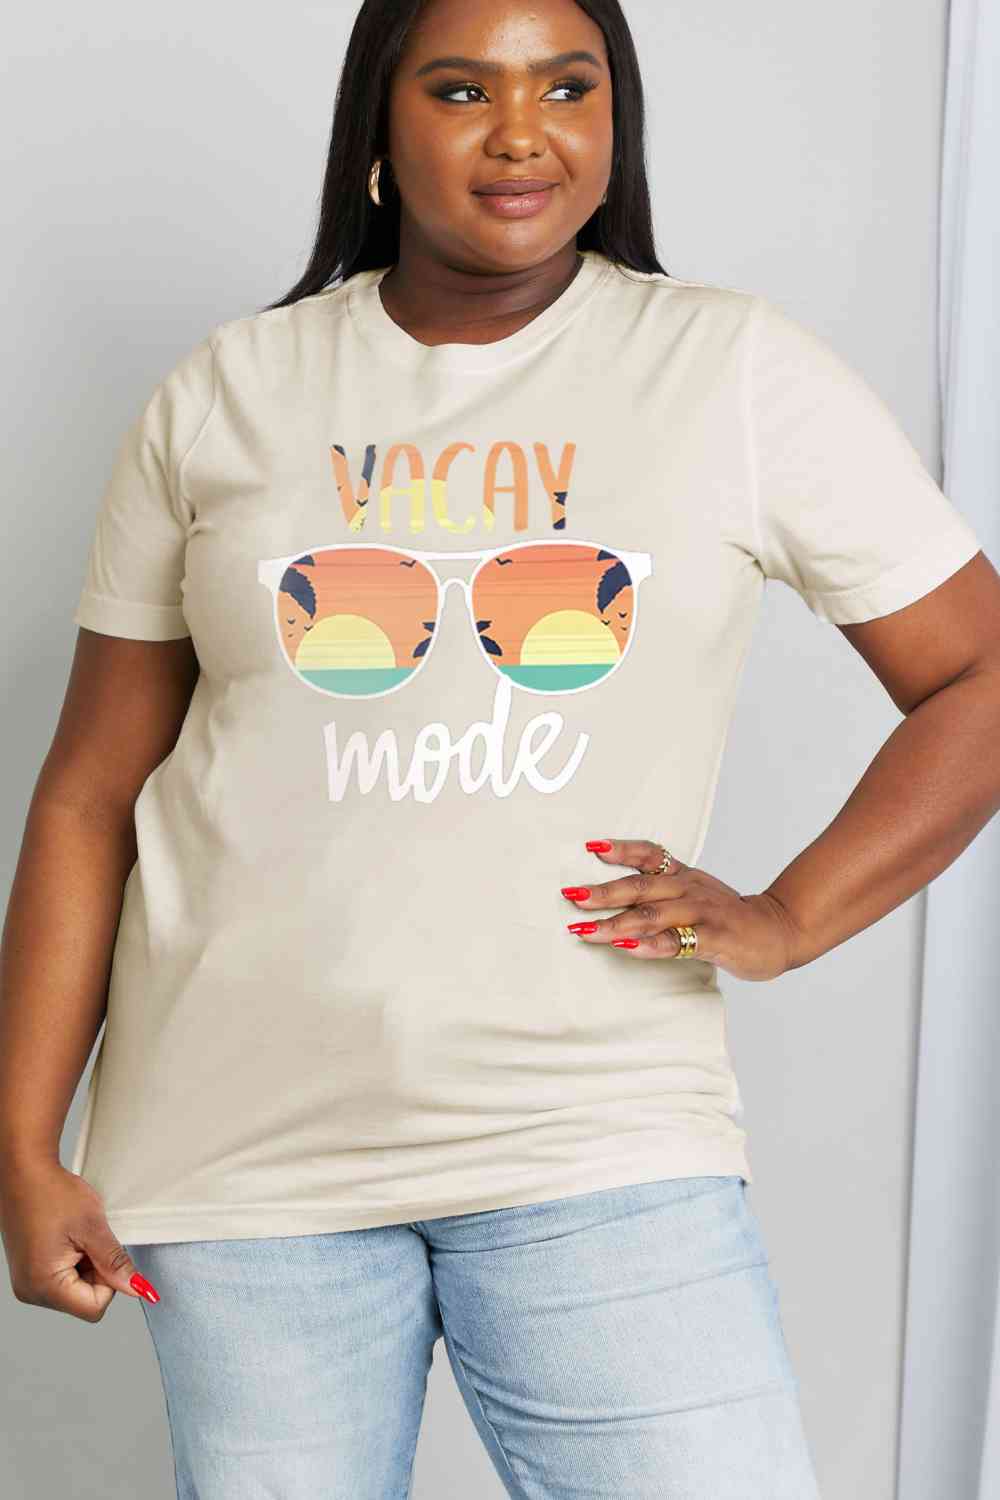 Simply Love Full Size VACAY MODE Graphic Cotton Tee - TRENDMELO